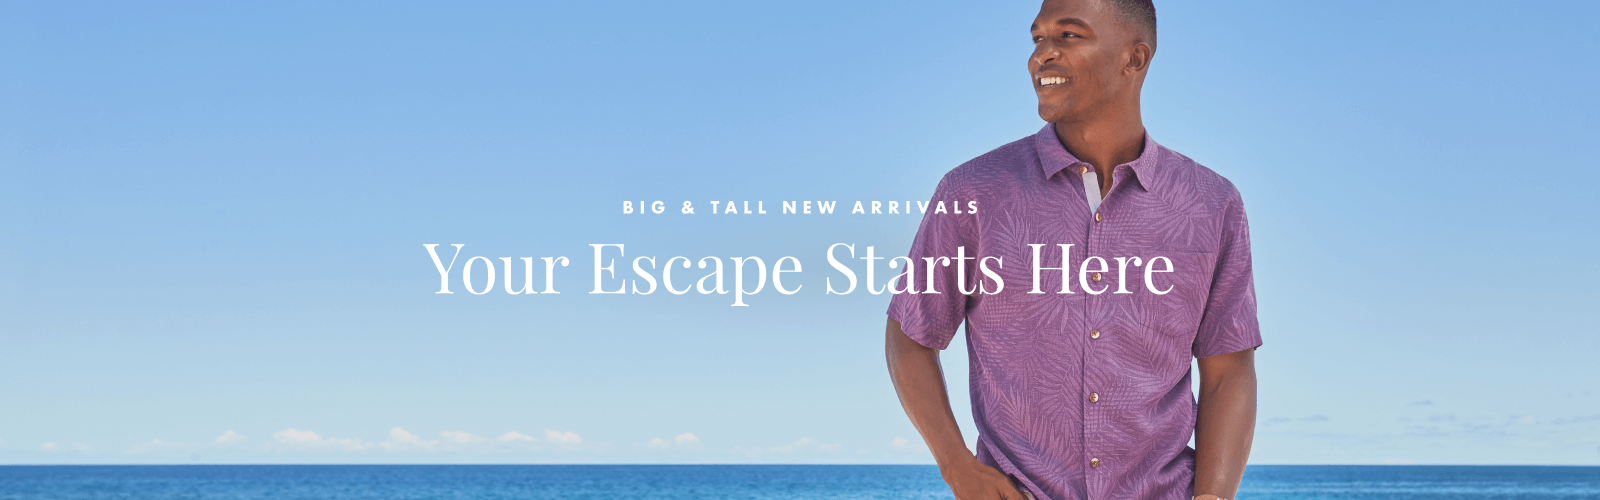 Big & Tall New Arrivals: Your Escape Starts Here